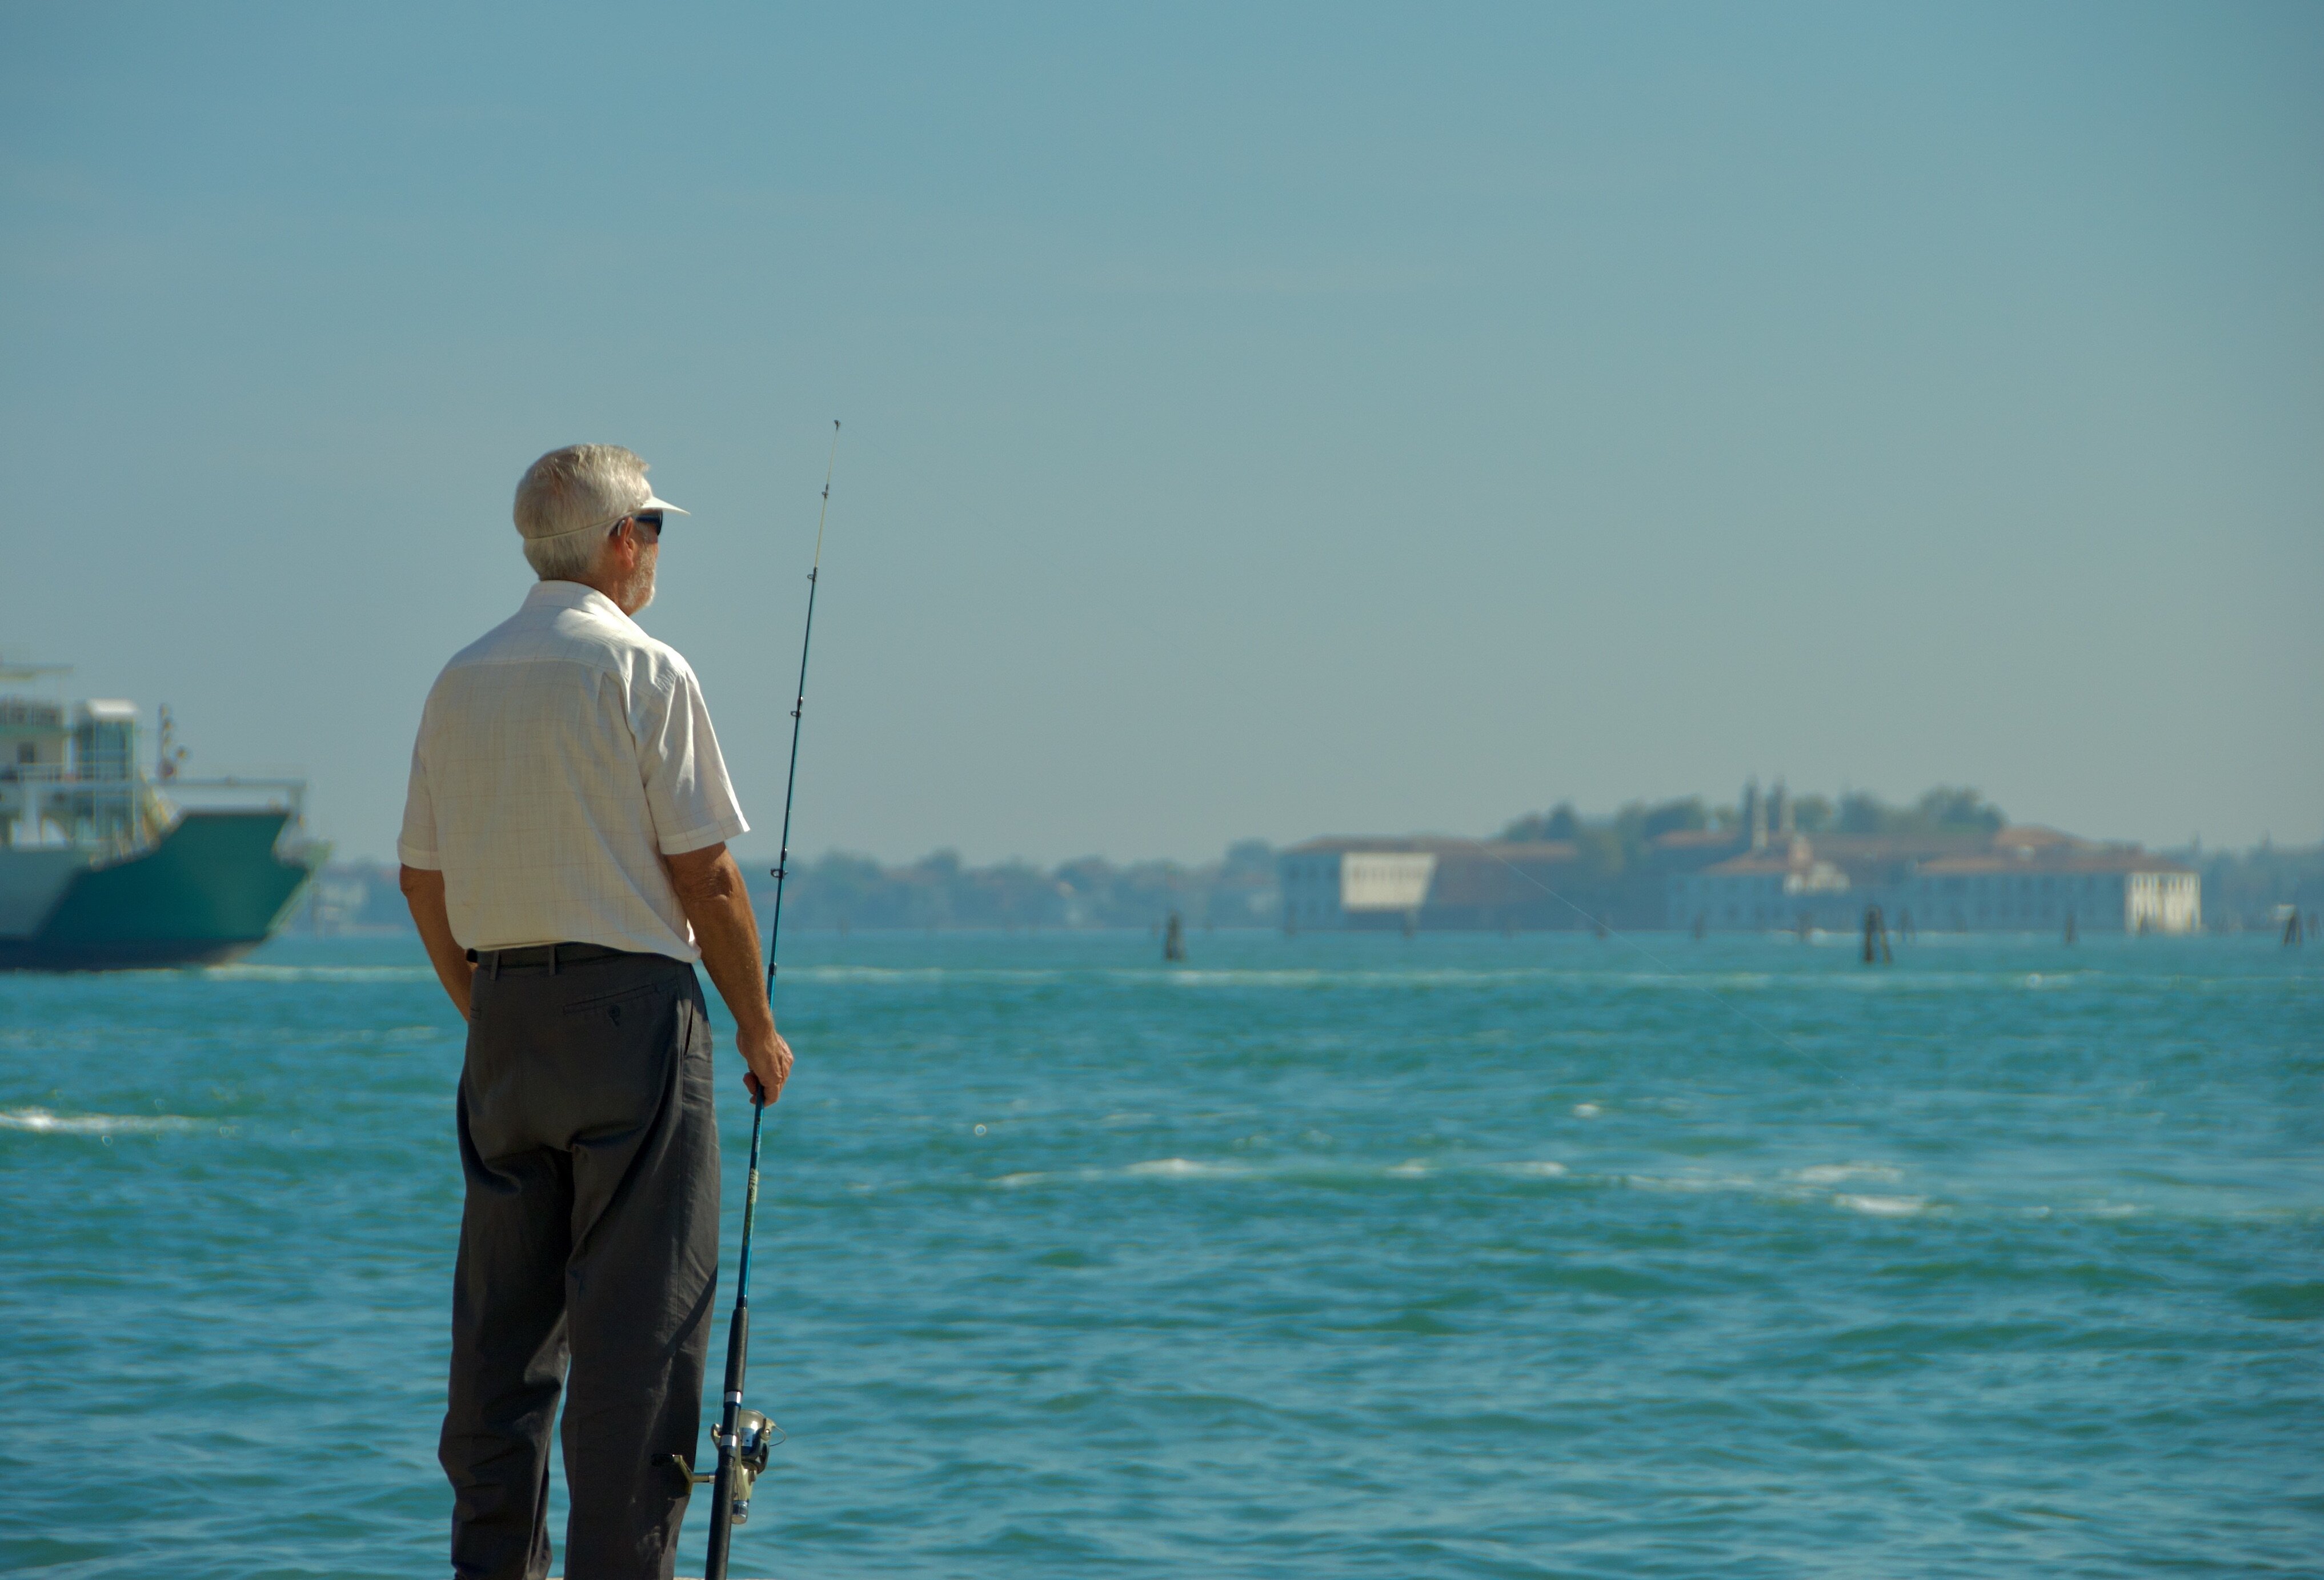 the old man and the lagoon, 09/2021 @Venezia - © PC